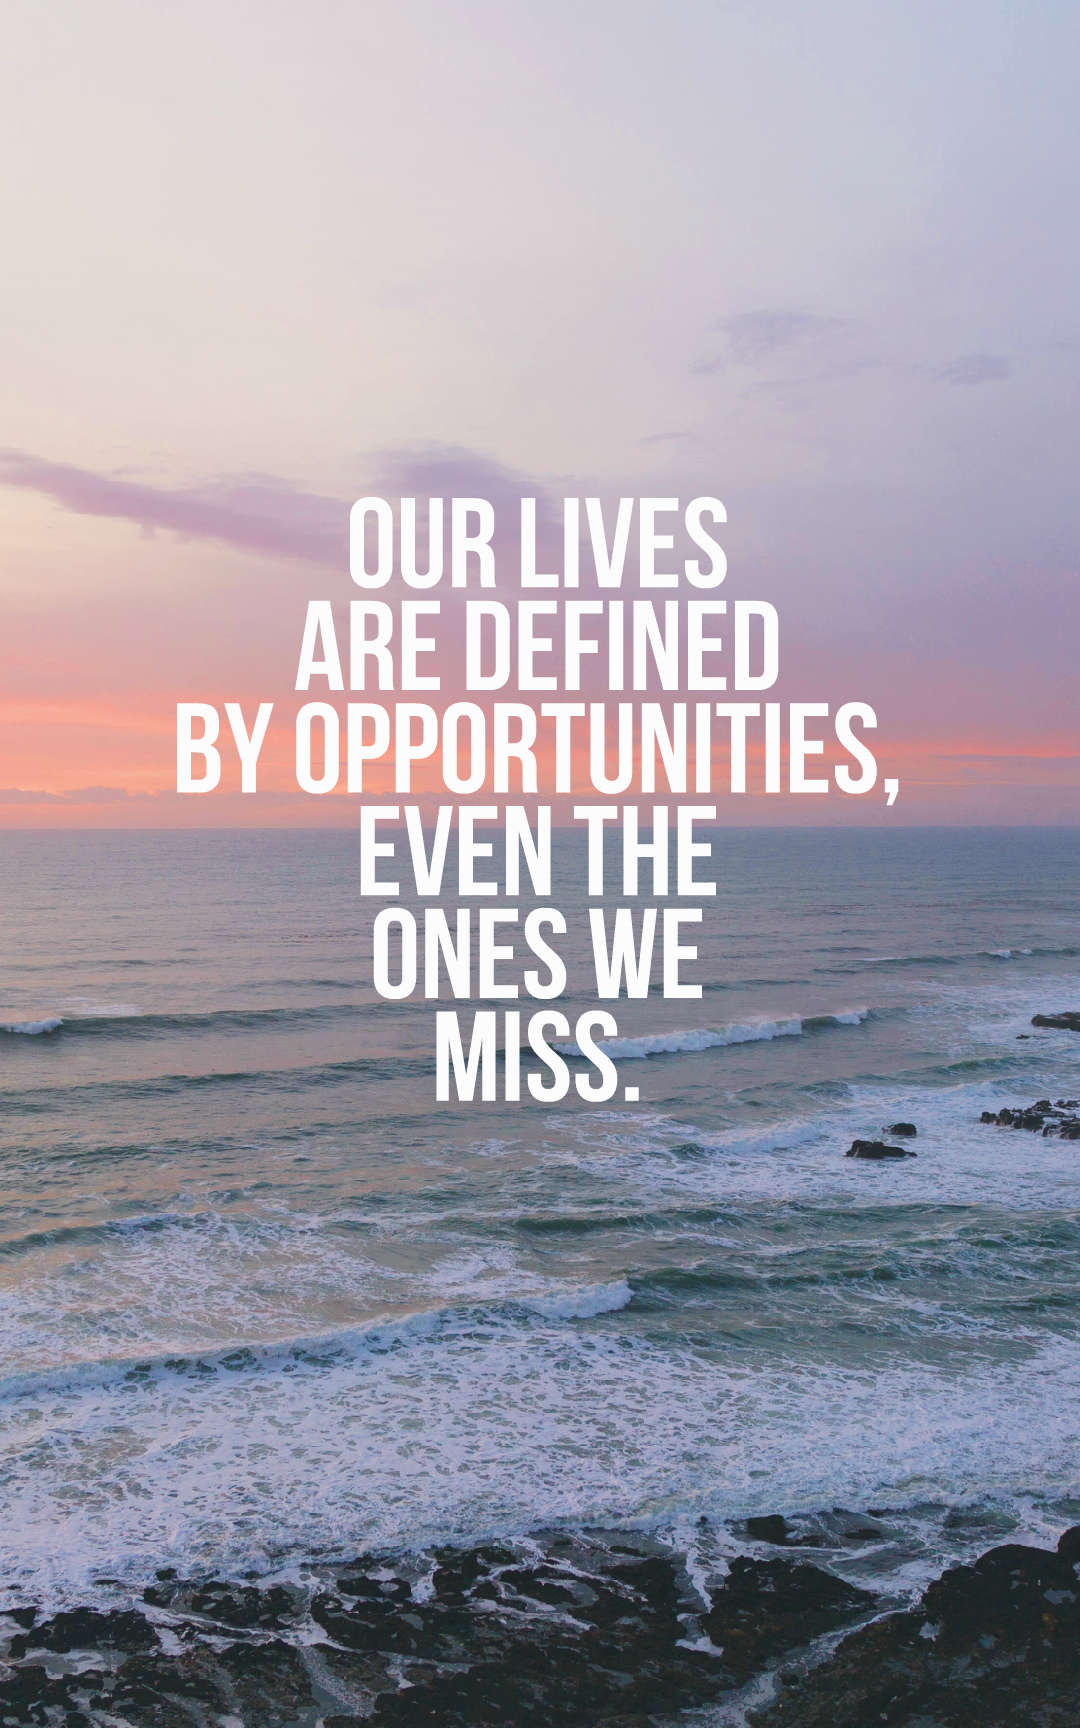 Our lives are defined by opportunities, even the ones we miss.